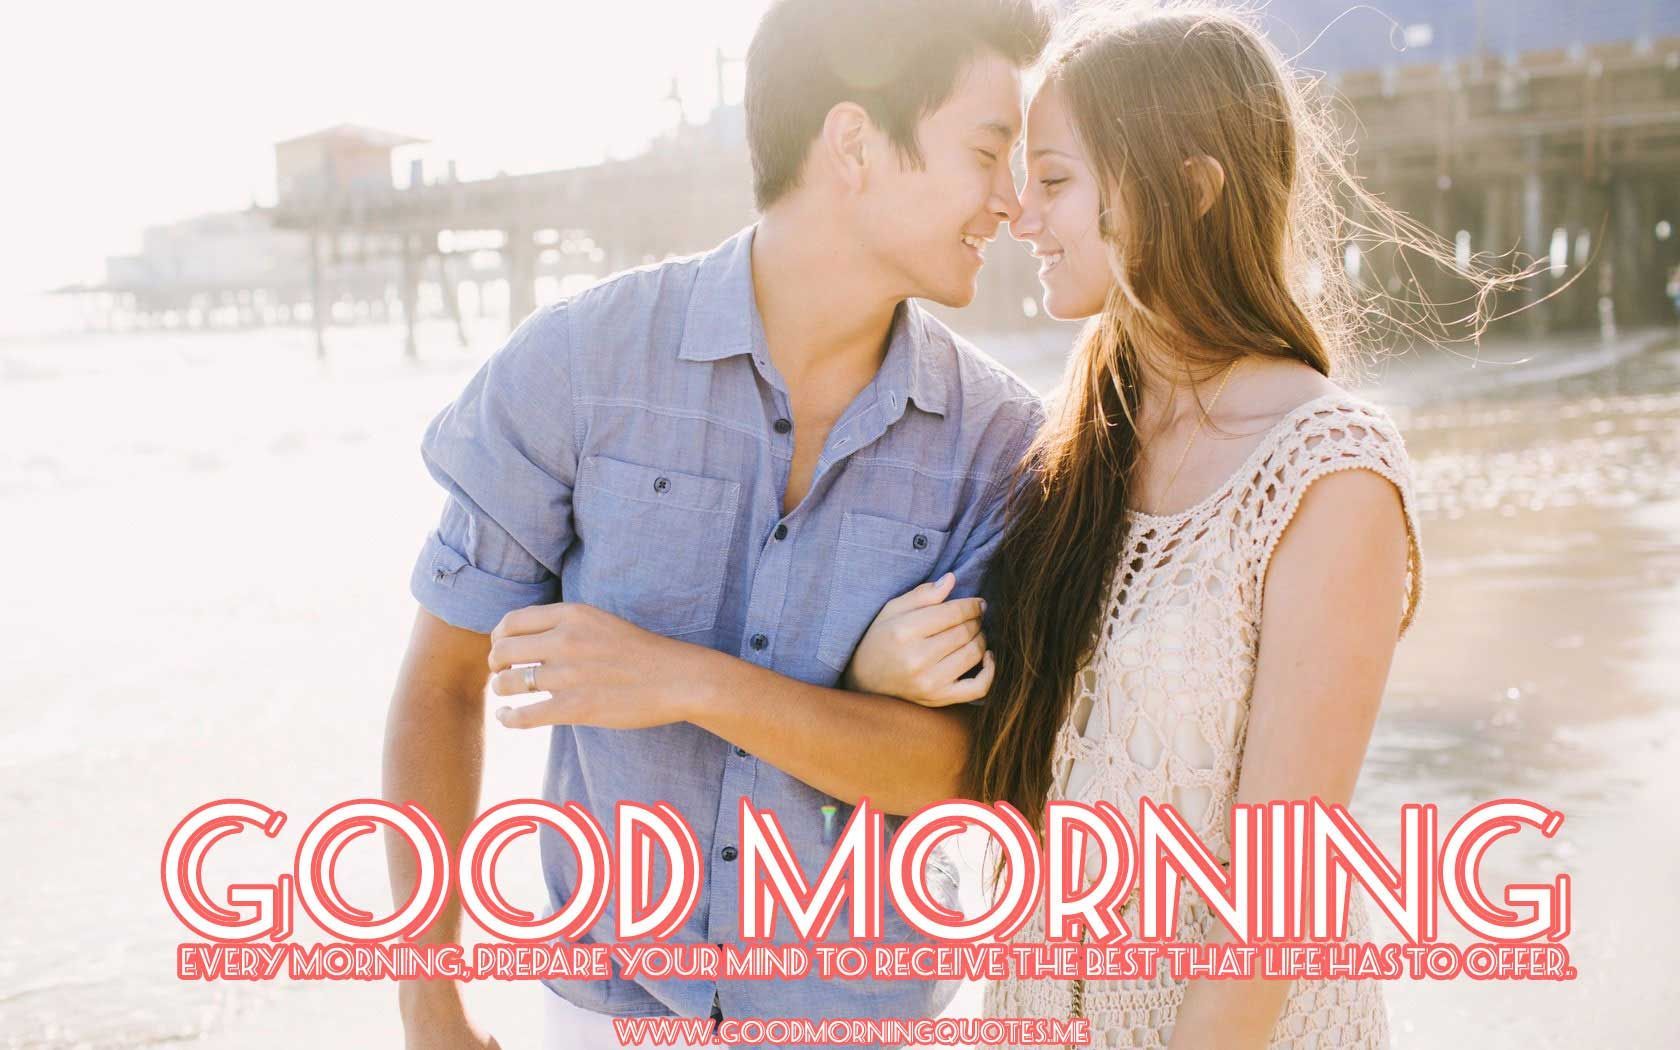 The most beautiful collection of good morning love couple image with quotes. send these love couple wallpaper to wish yo. Love couple image, Couples image, Cute love couple